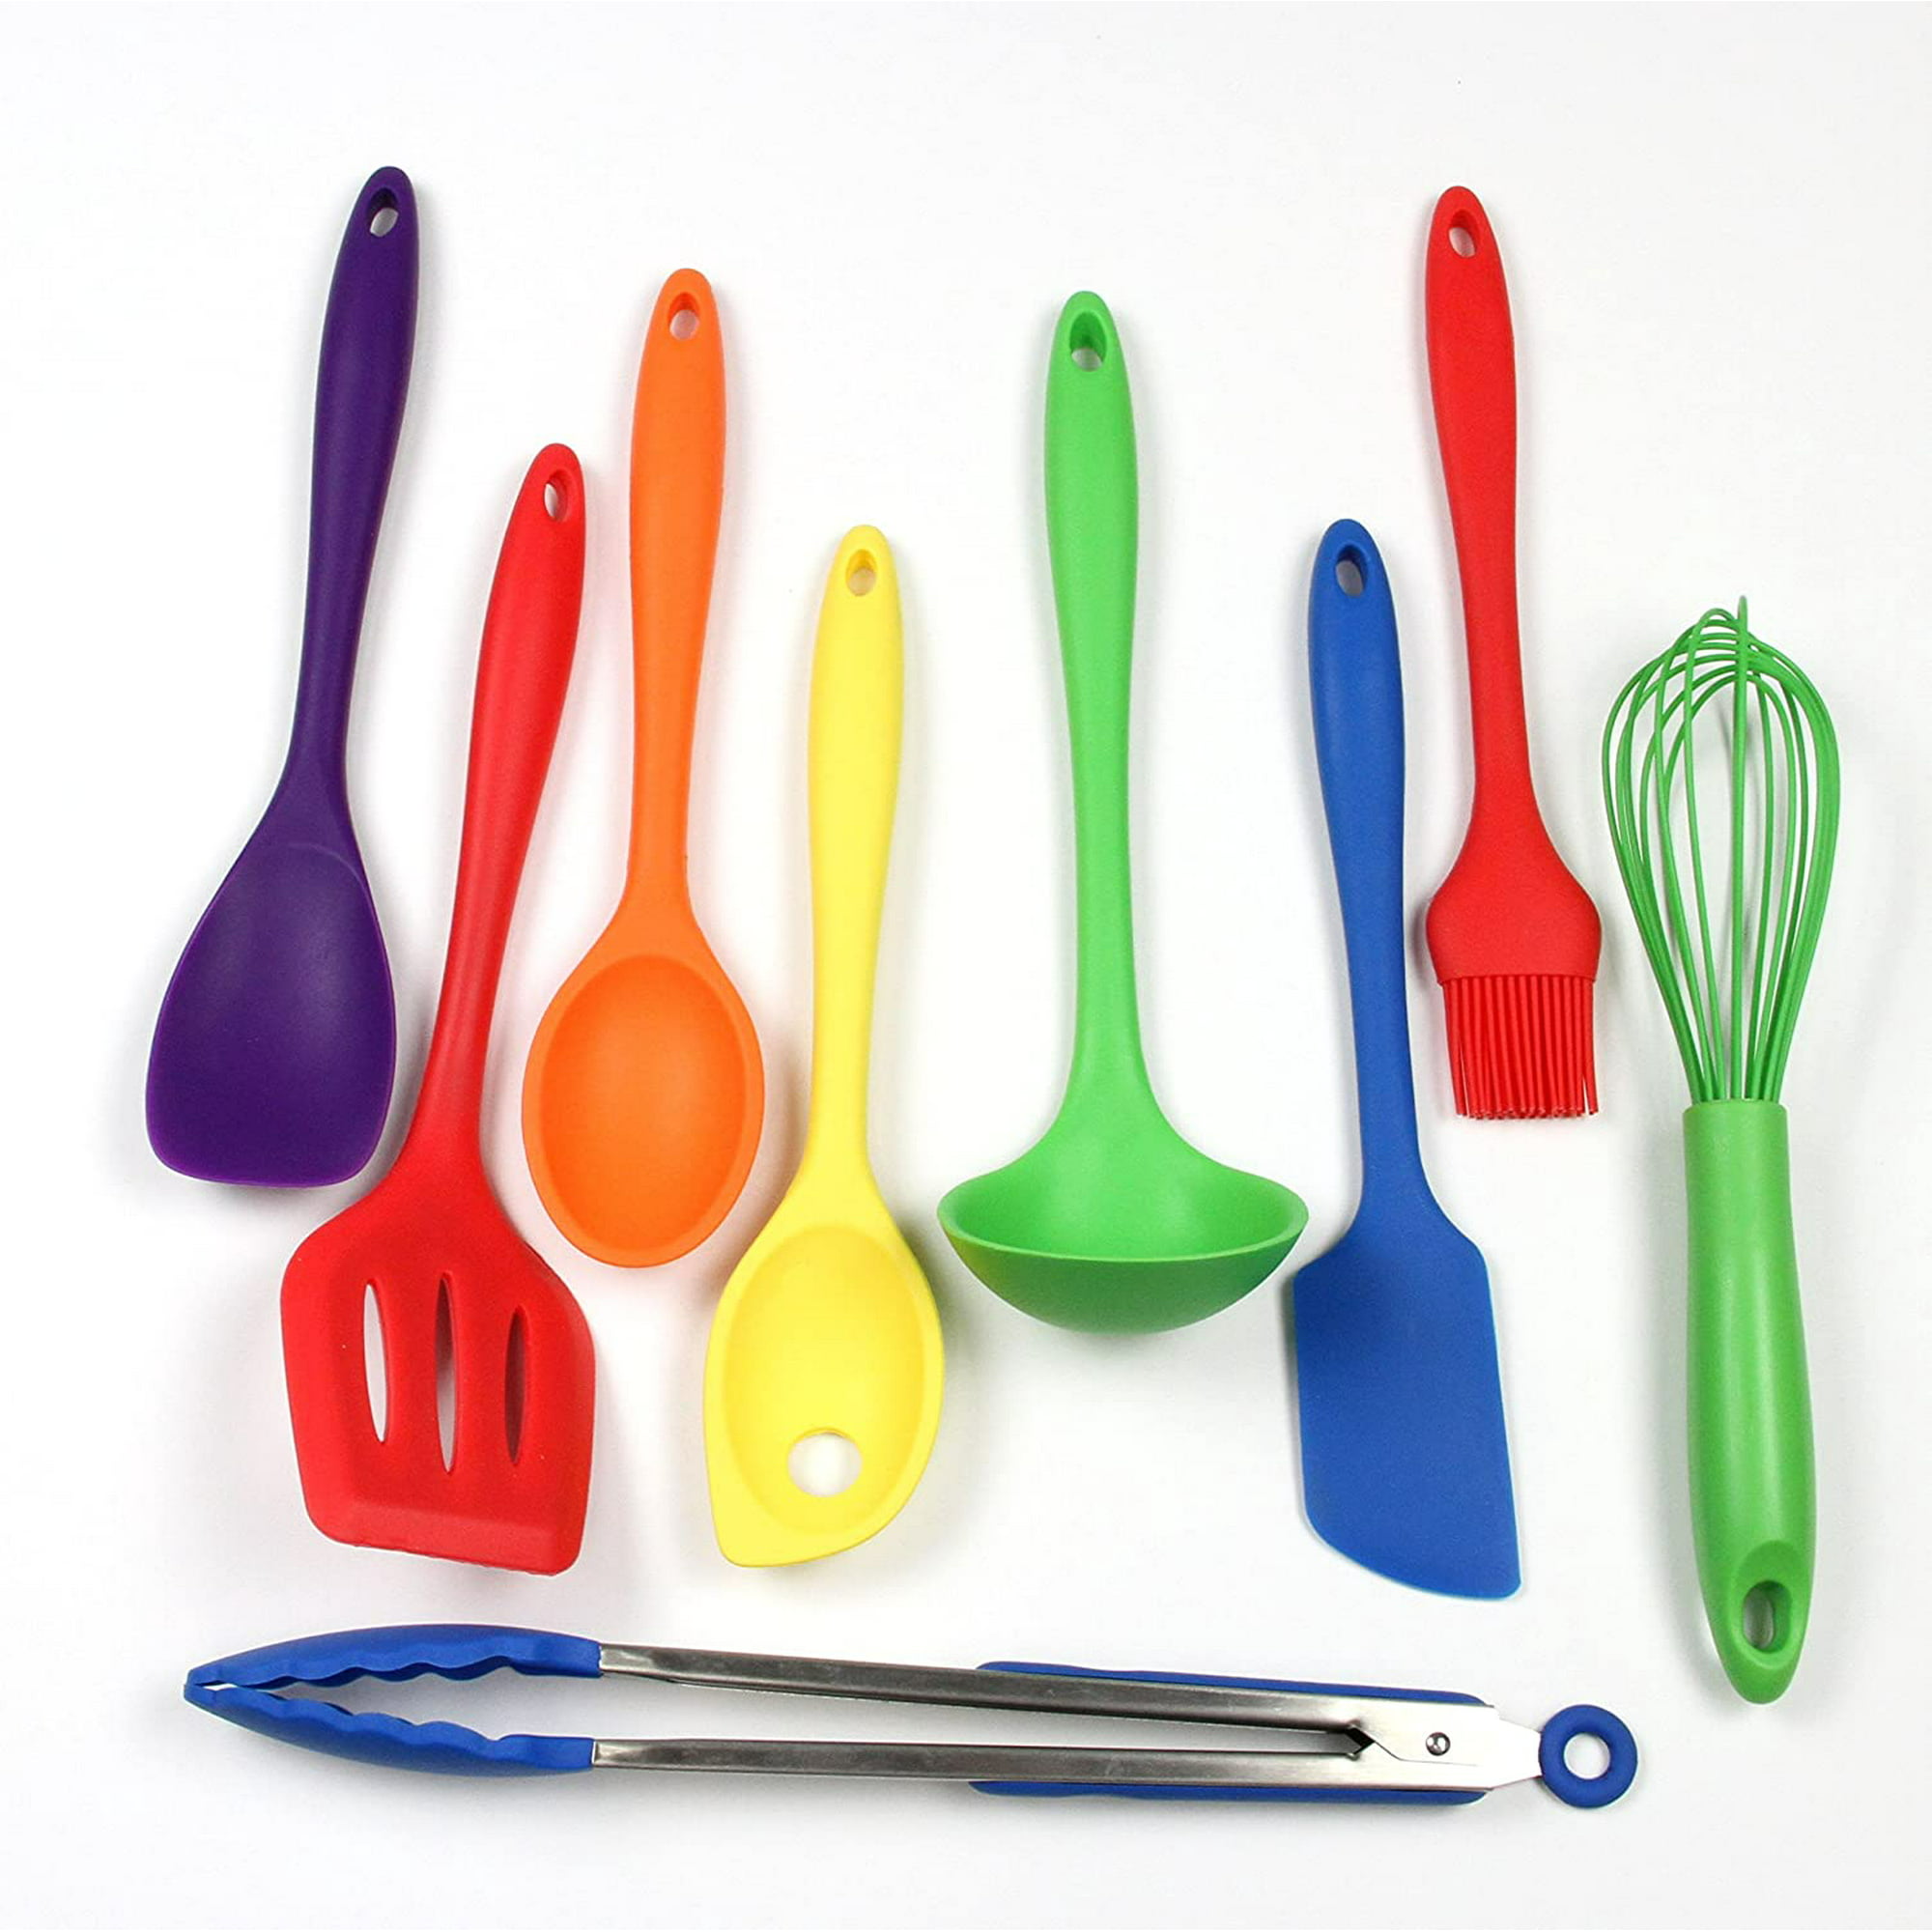 9 Piece Silicone Kitchen Tool and Utensil Set | Walmart Canada